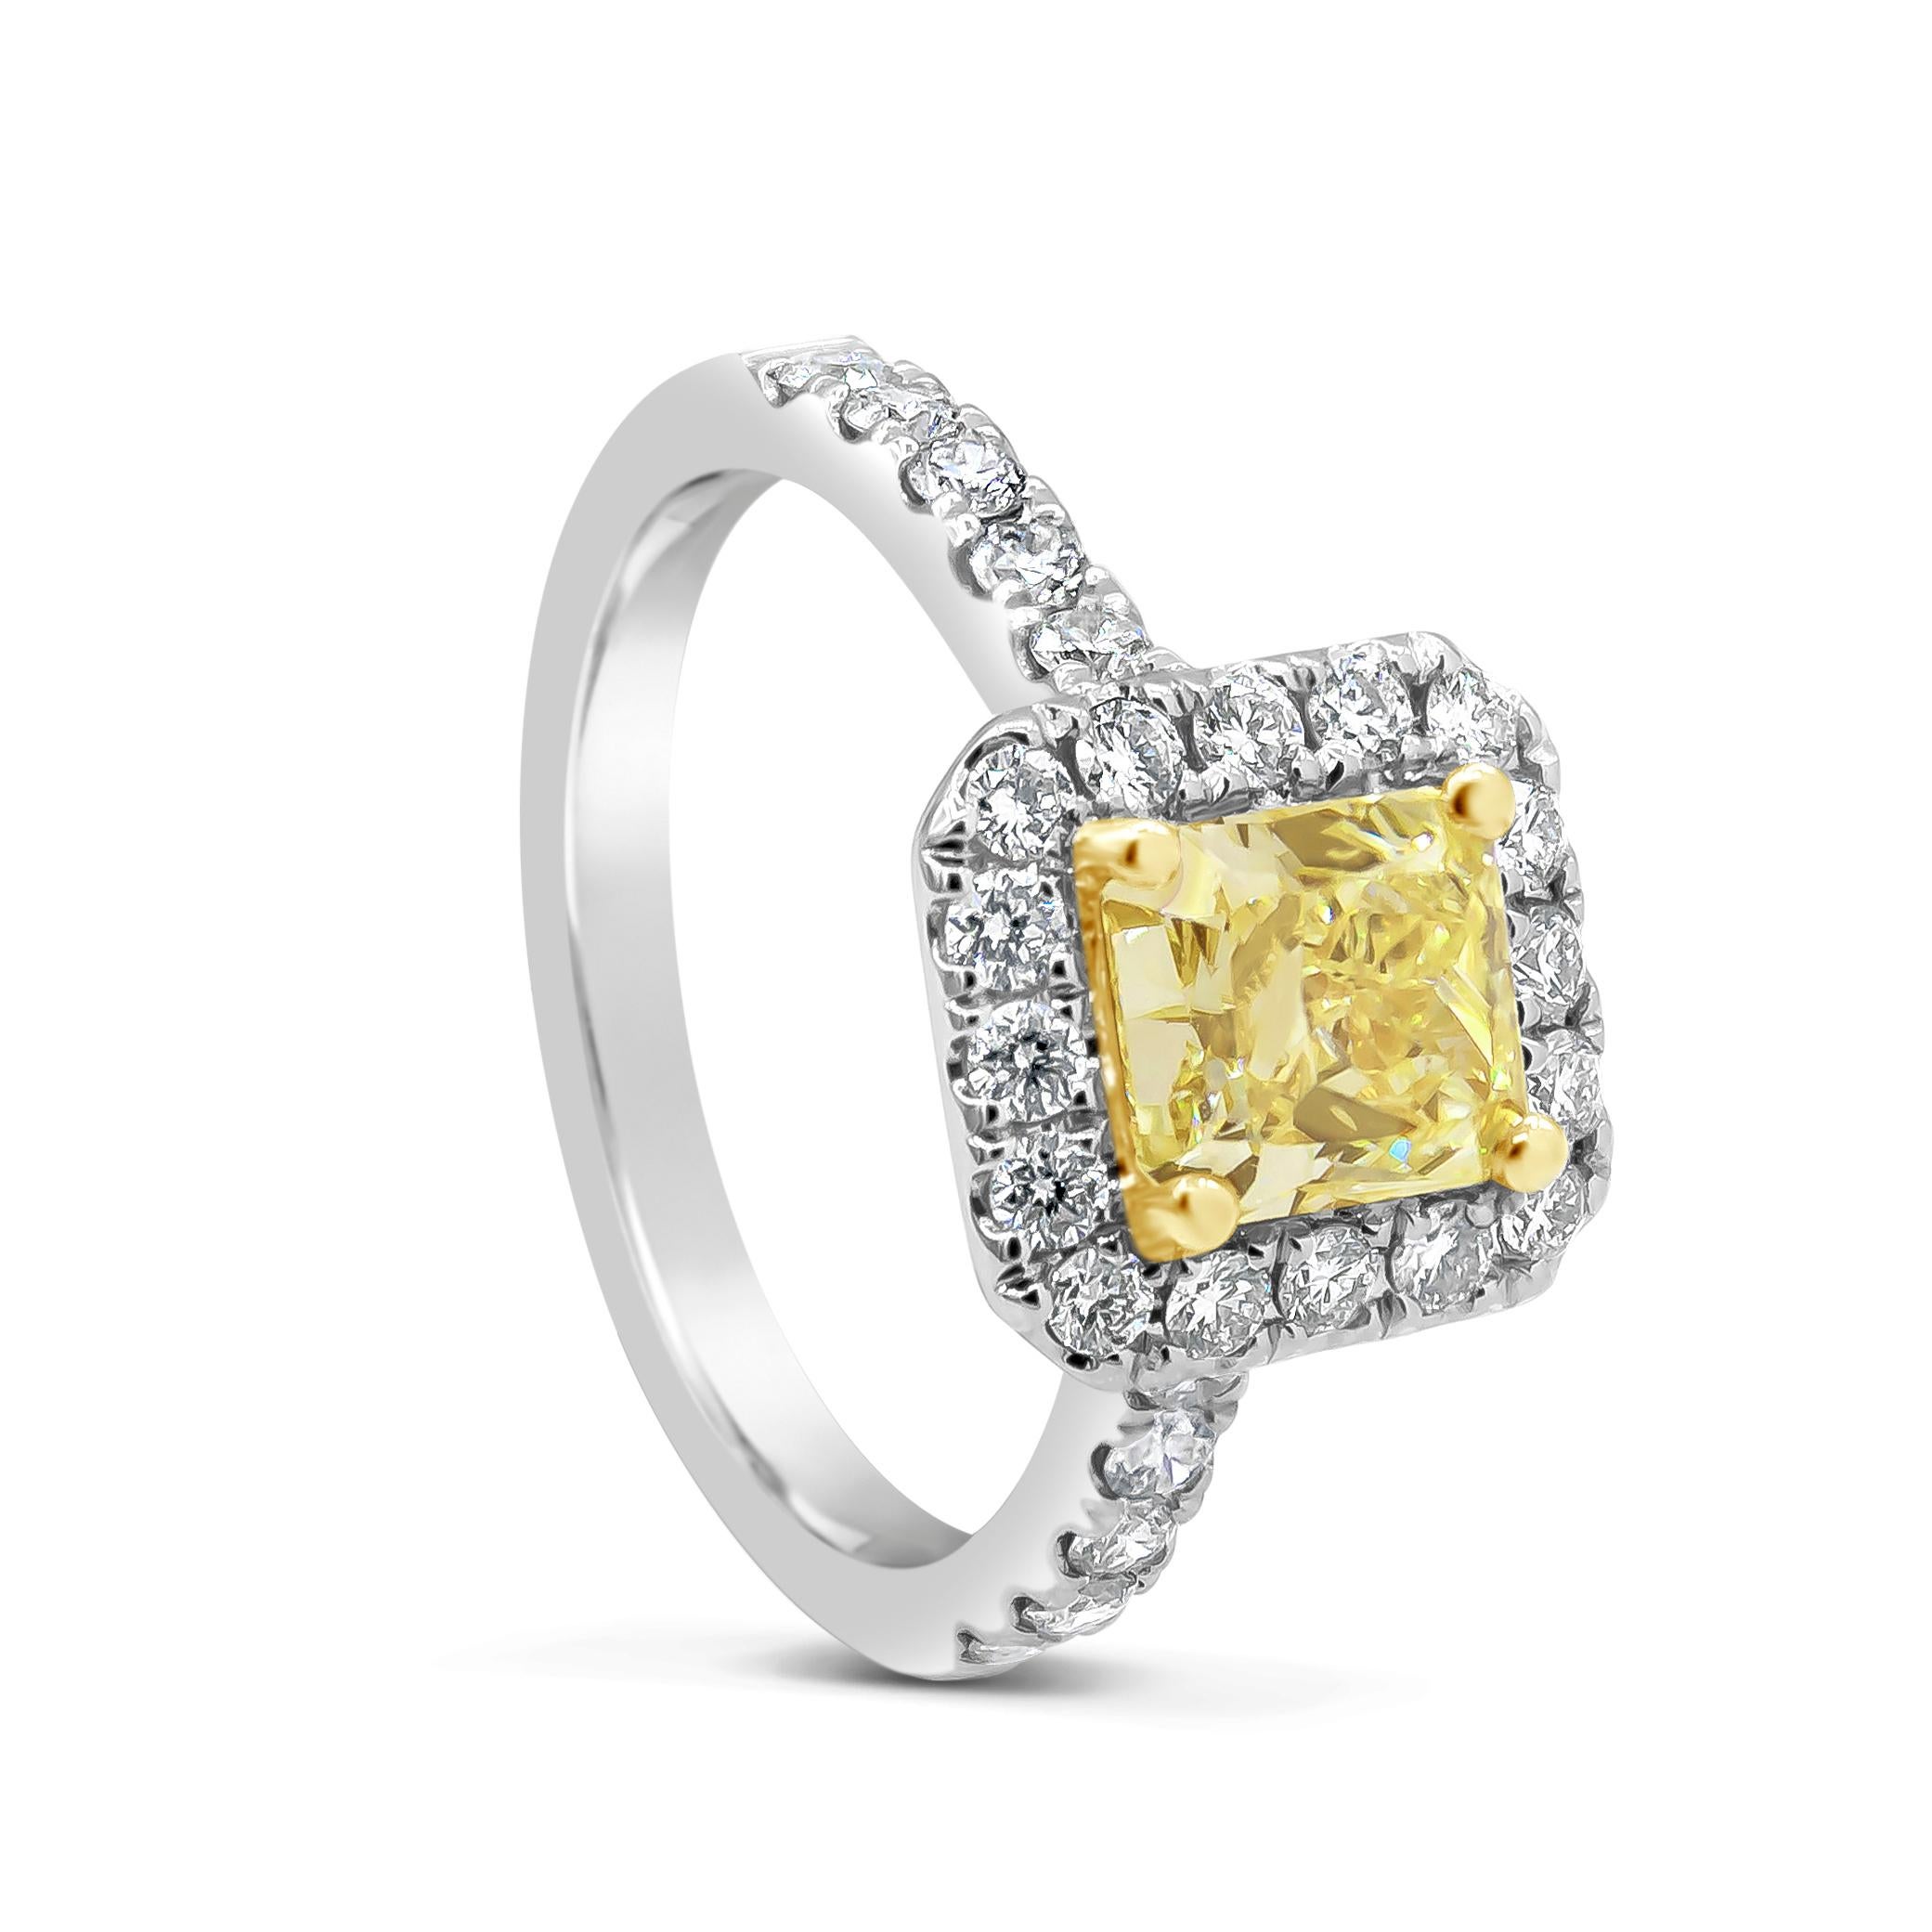 A stylish engagement ring showcasing a natural light yellow radiant cut diamond weighing 1.24 carats. GIA certified the diamond as natural light yellow (U-V) color. Surrounding the center stone is a single row of round brilliant diamonds on a